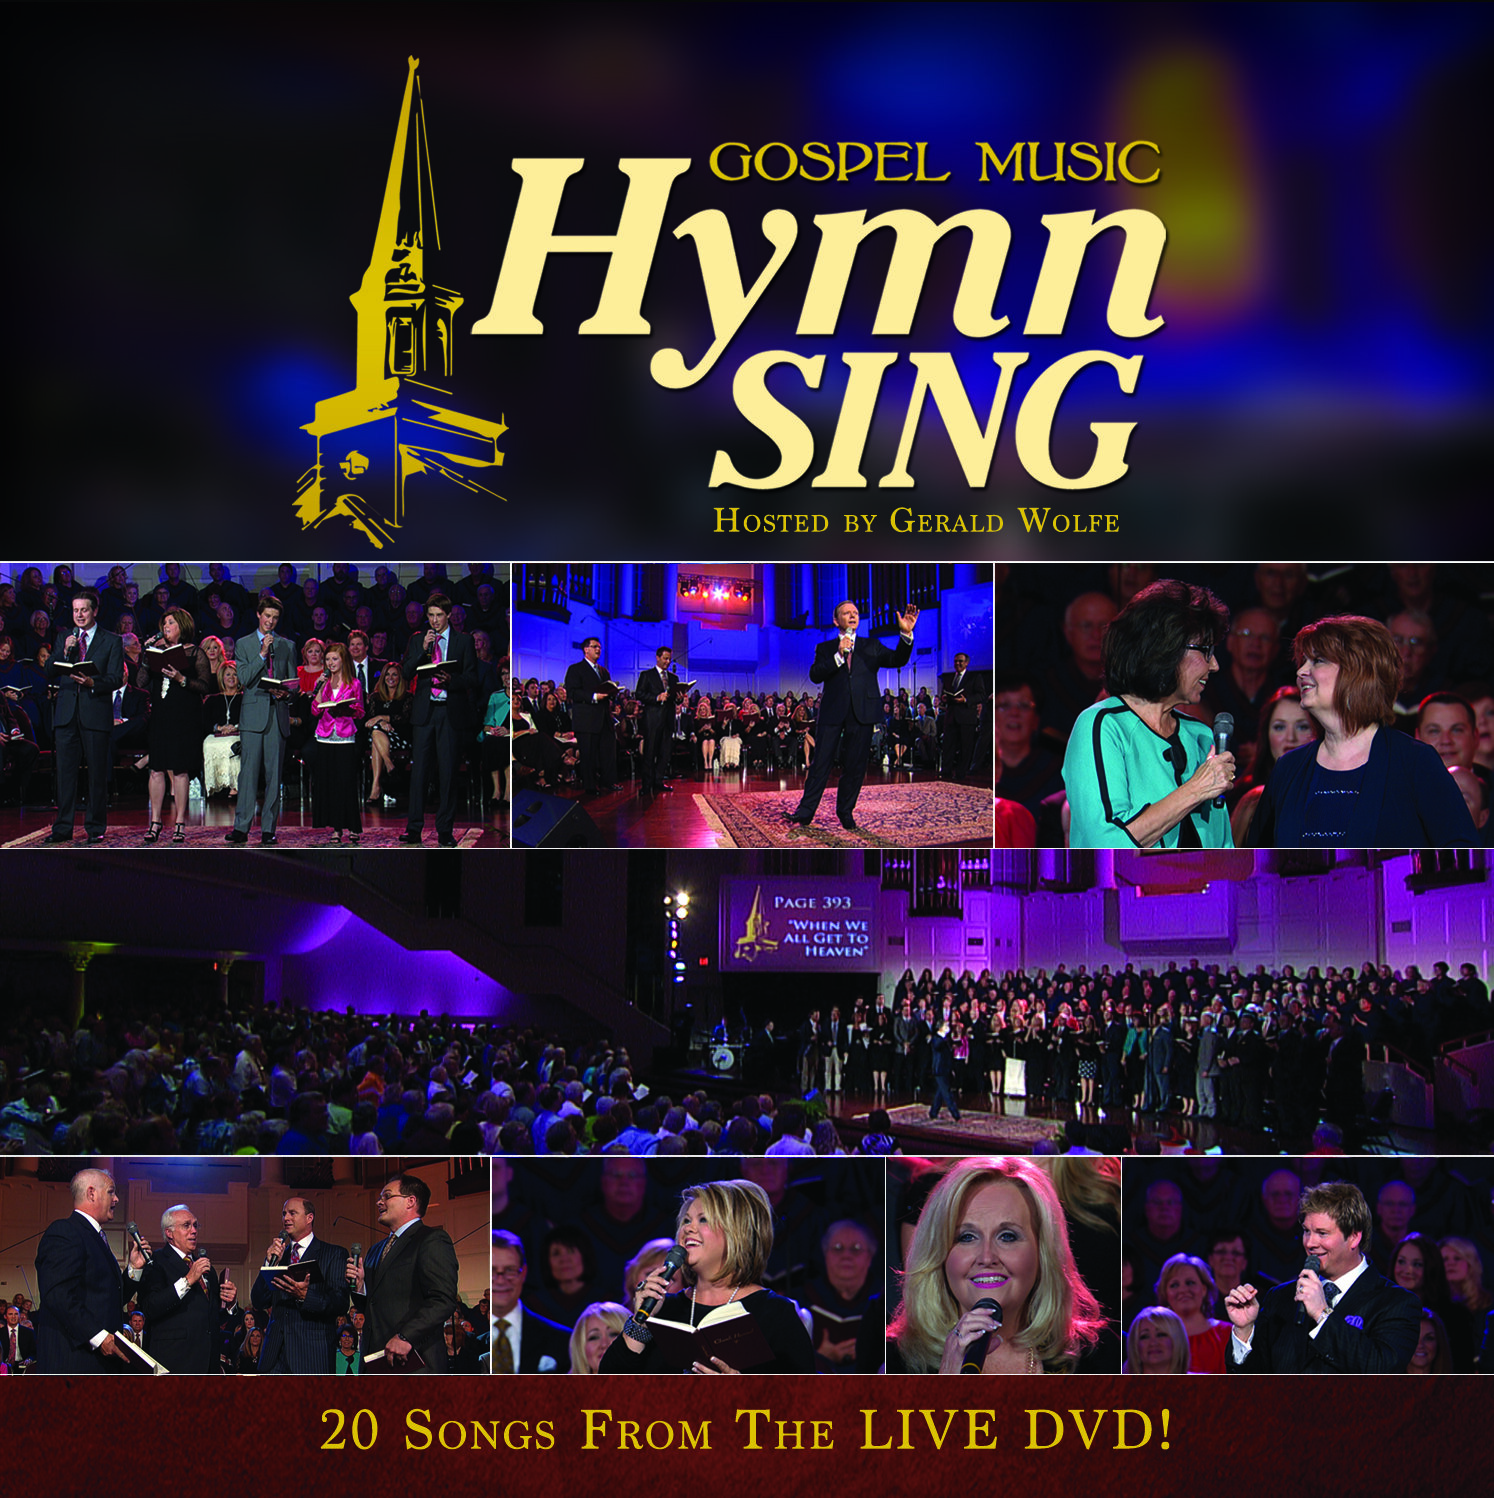 Art for Jesus Saves by The Gospel Music Hymn Sing